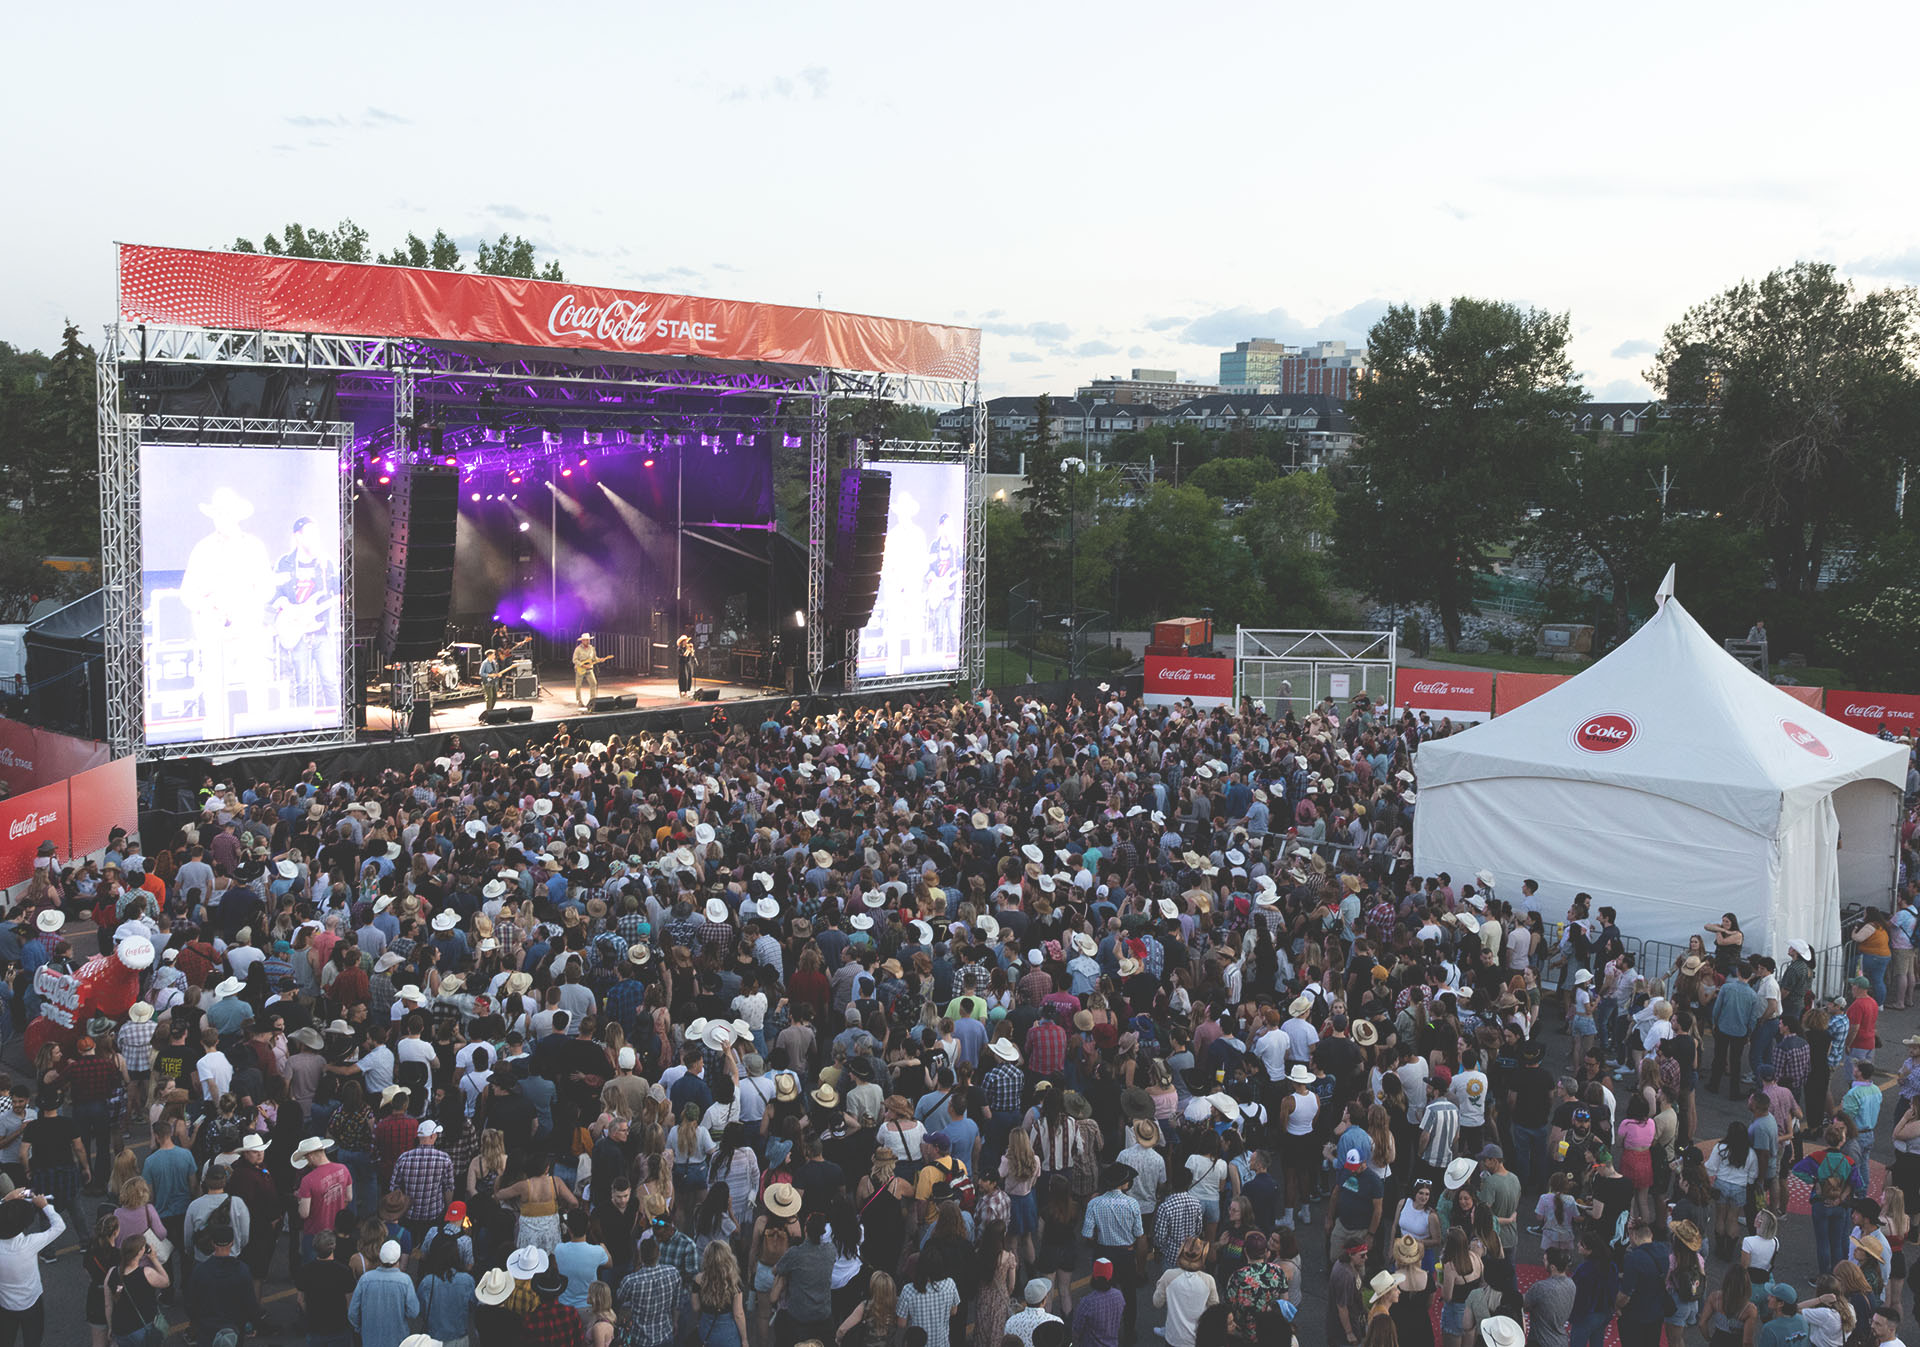 The Coca-Cola Stage on the Calgary Stampede Grounds